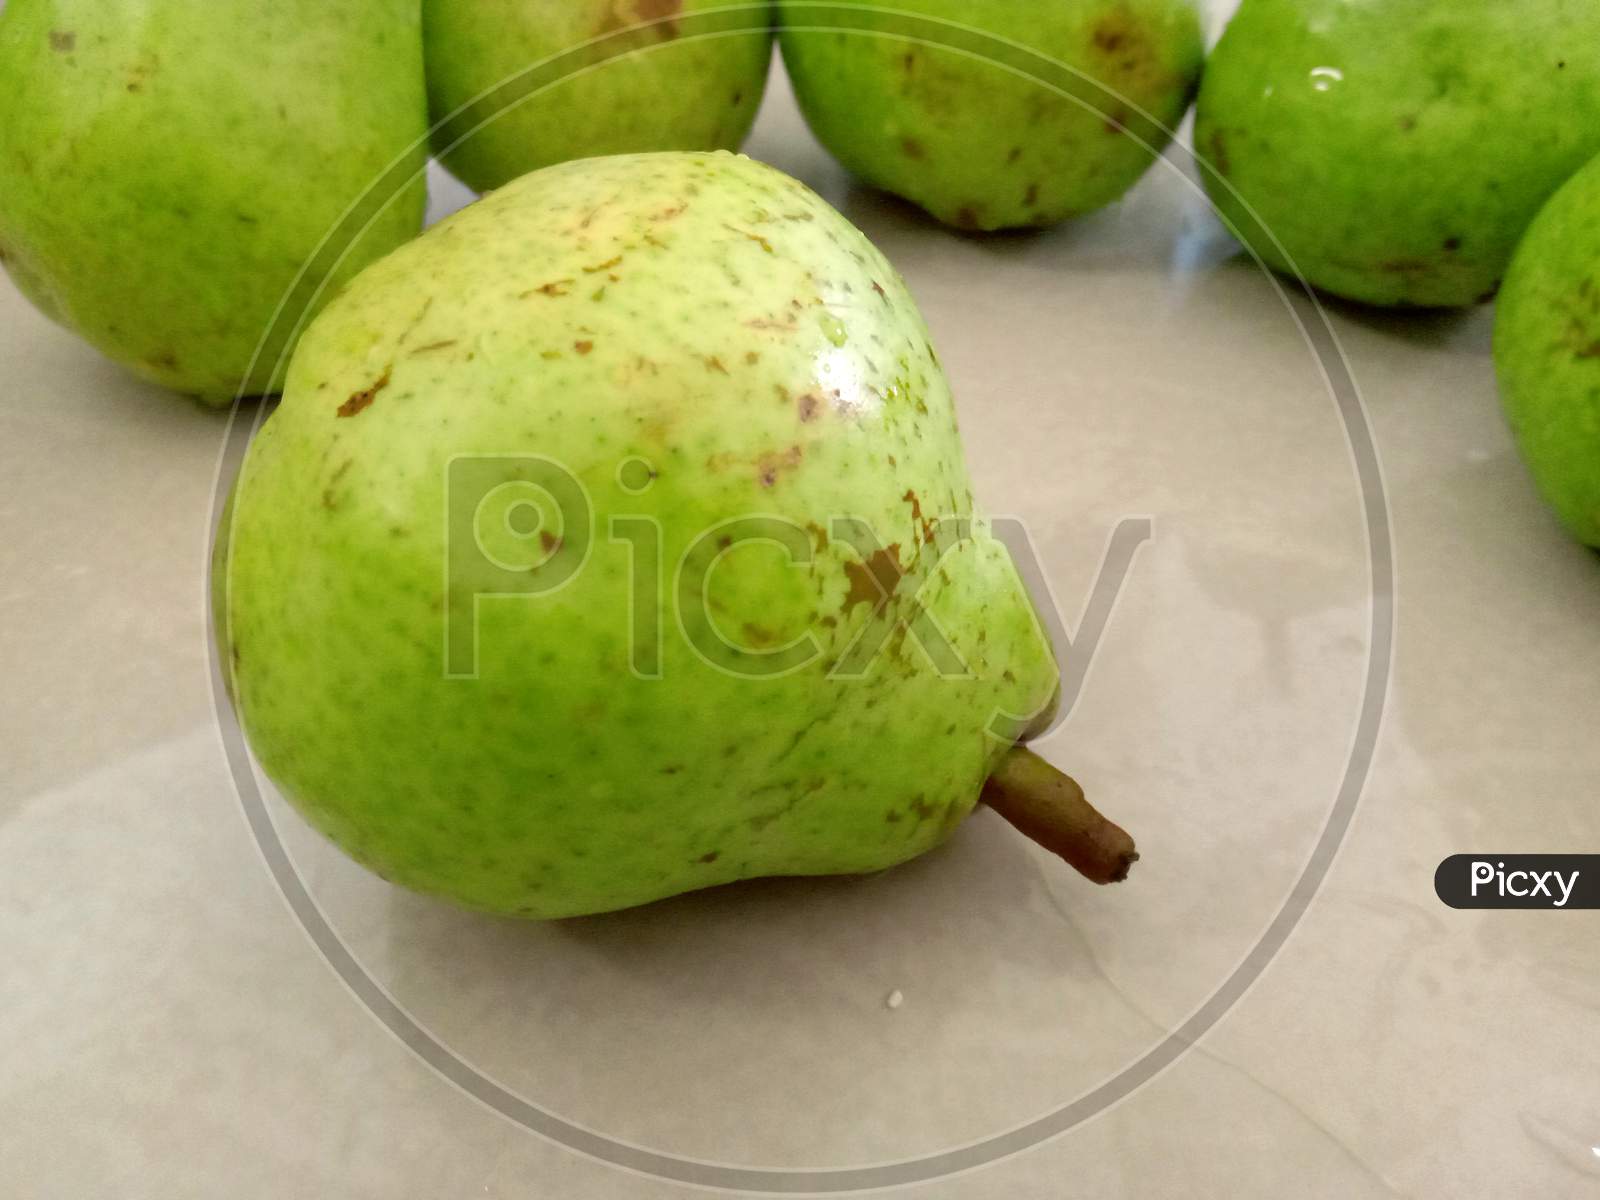 Whole Pears And Background Multi Pears Background